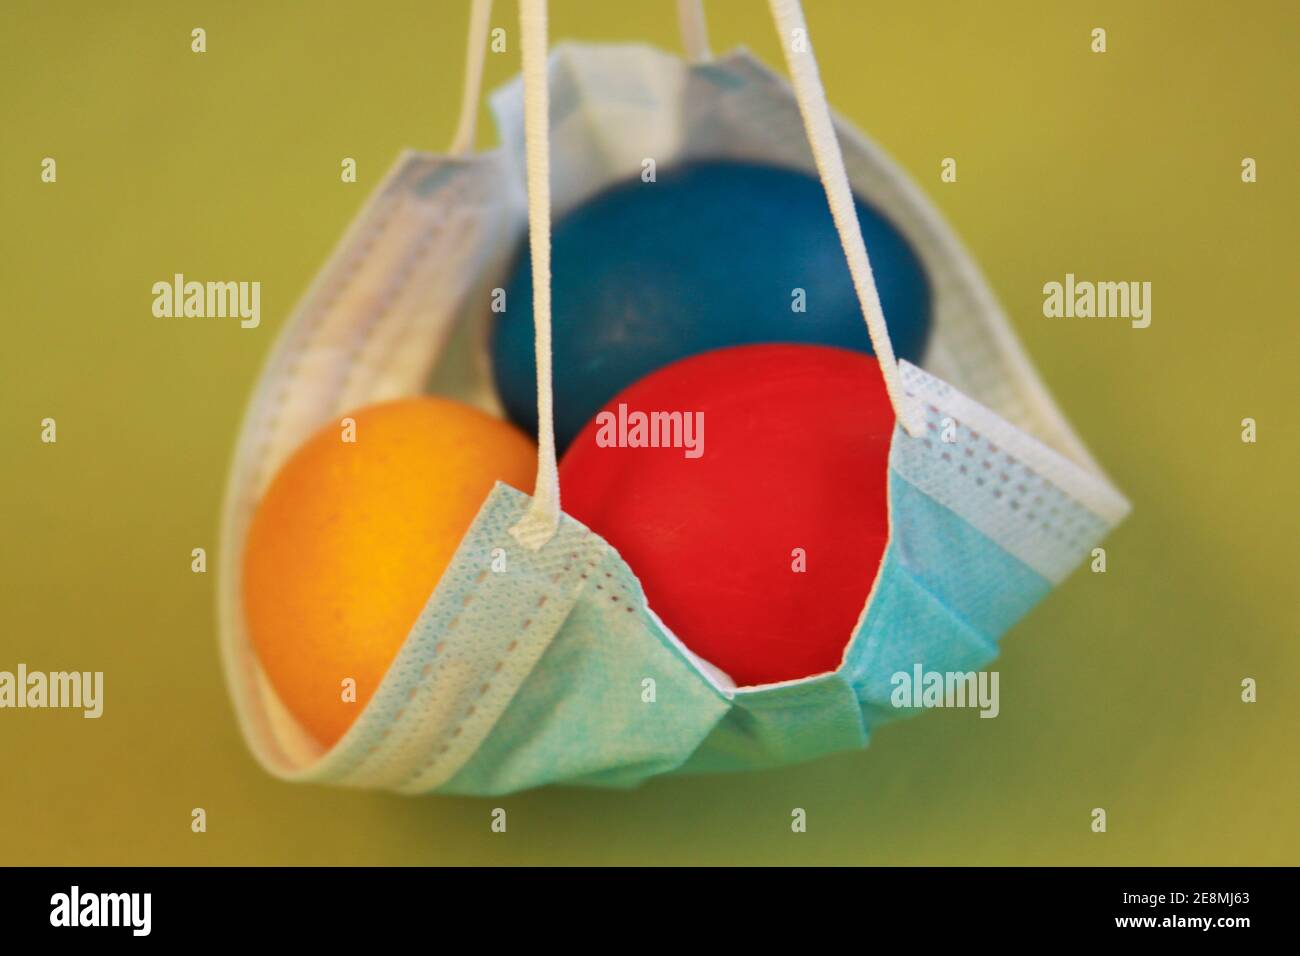 Isolated colored painted Easter eggs in surgical mask, a symbol of coronavirus pandemic. Safety first while celebrating Easter 2020 covid 19 outbreak Stock Photo